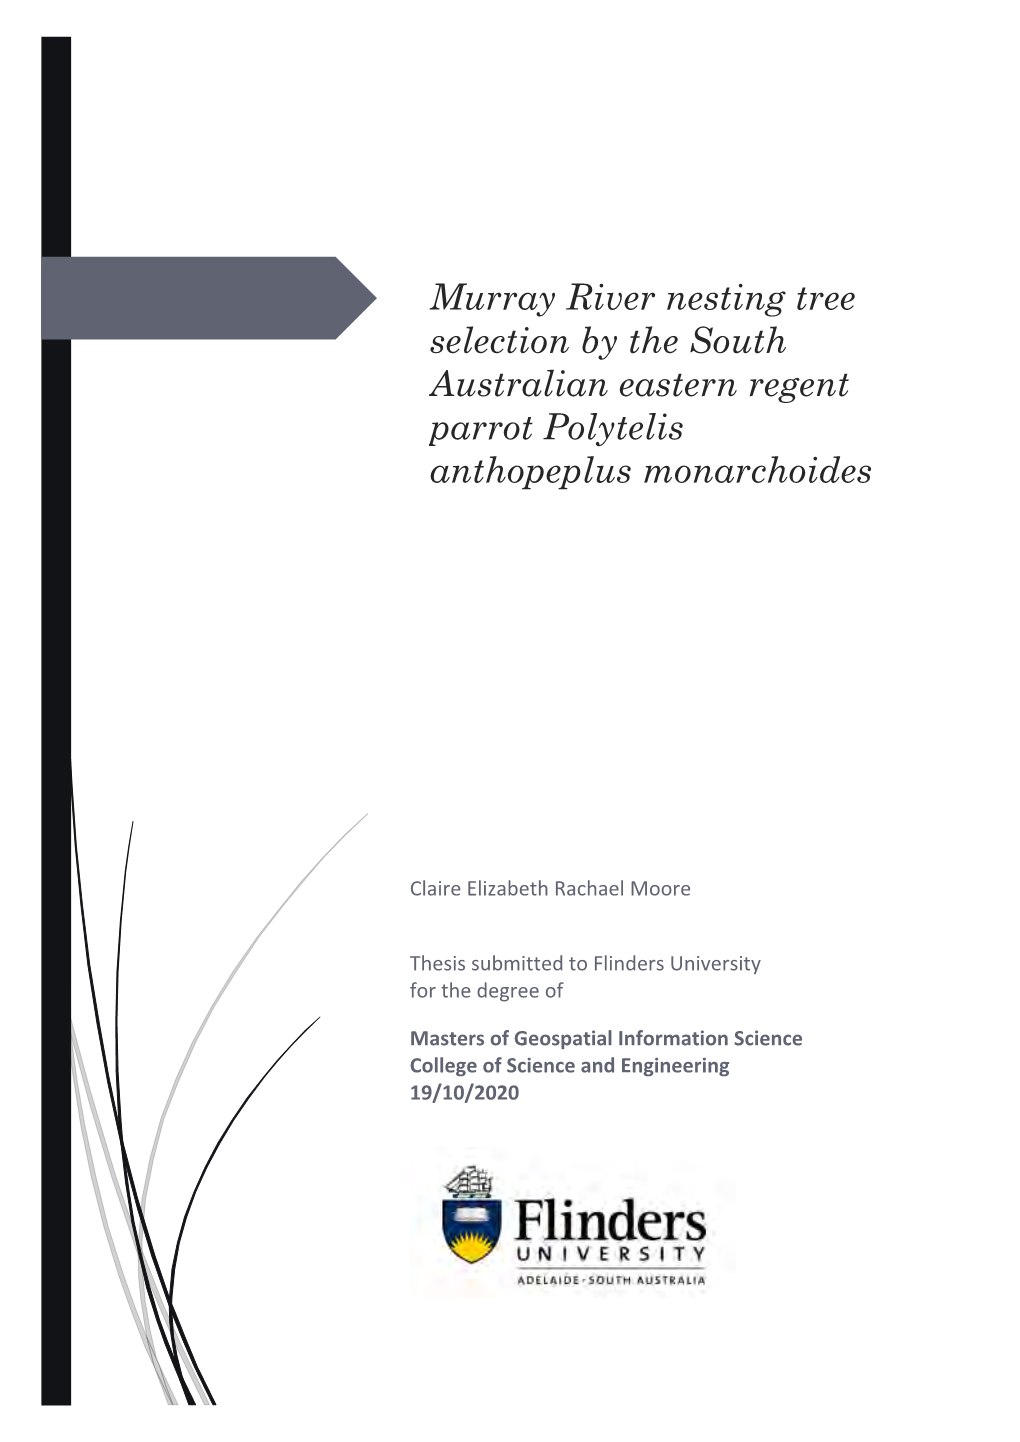 Murray River Nesting Tree Selection by the South Australian Eastern Regent Parrot Polytelis Anthopeplus Monarchoides